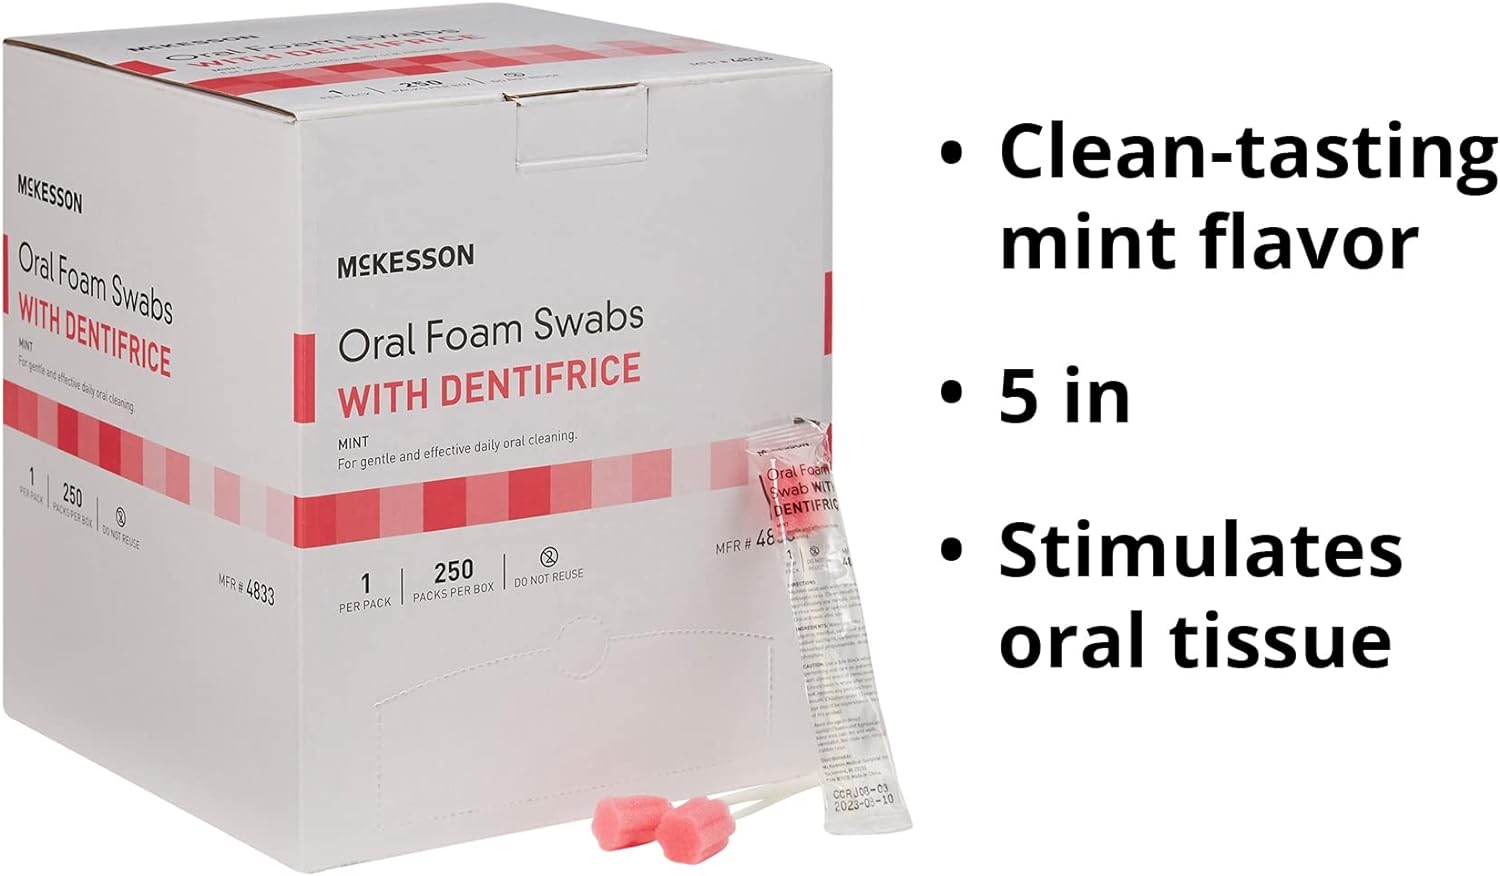 McKesson Oral Foam Swabs with Dentifrice, Gentle and Daily Oral Cleaning, Mint, 250 Count, 1 Pack